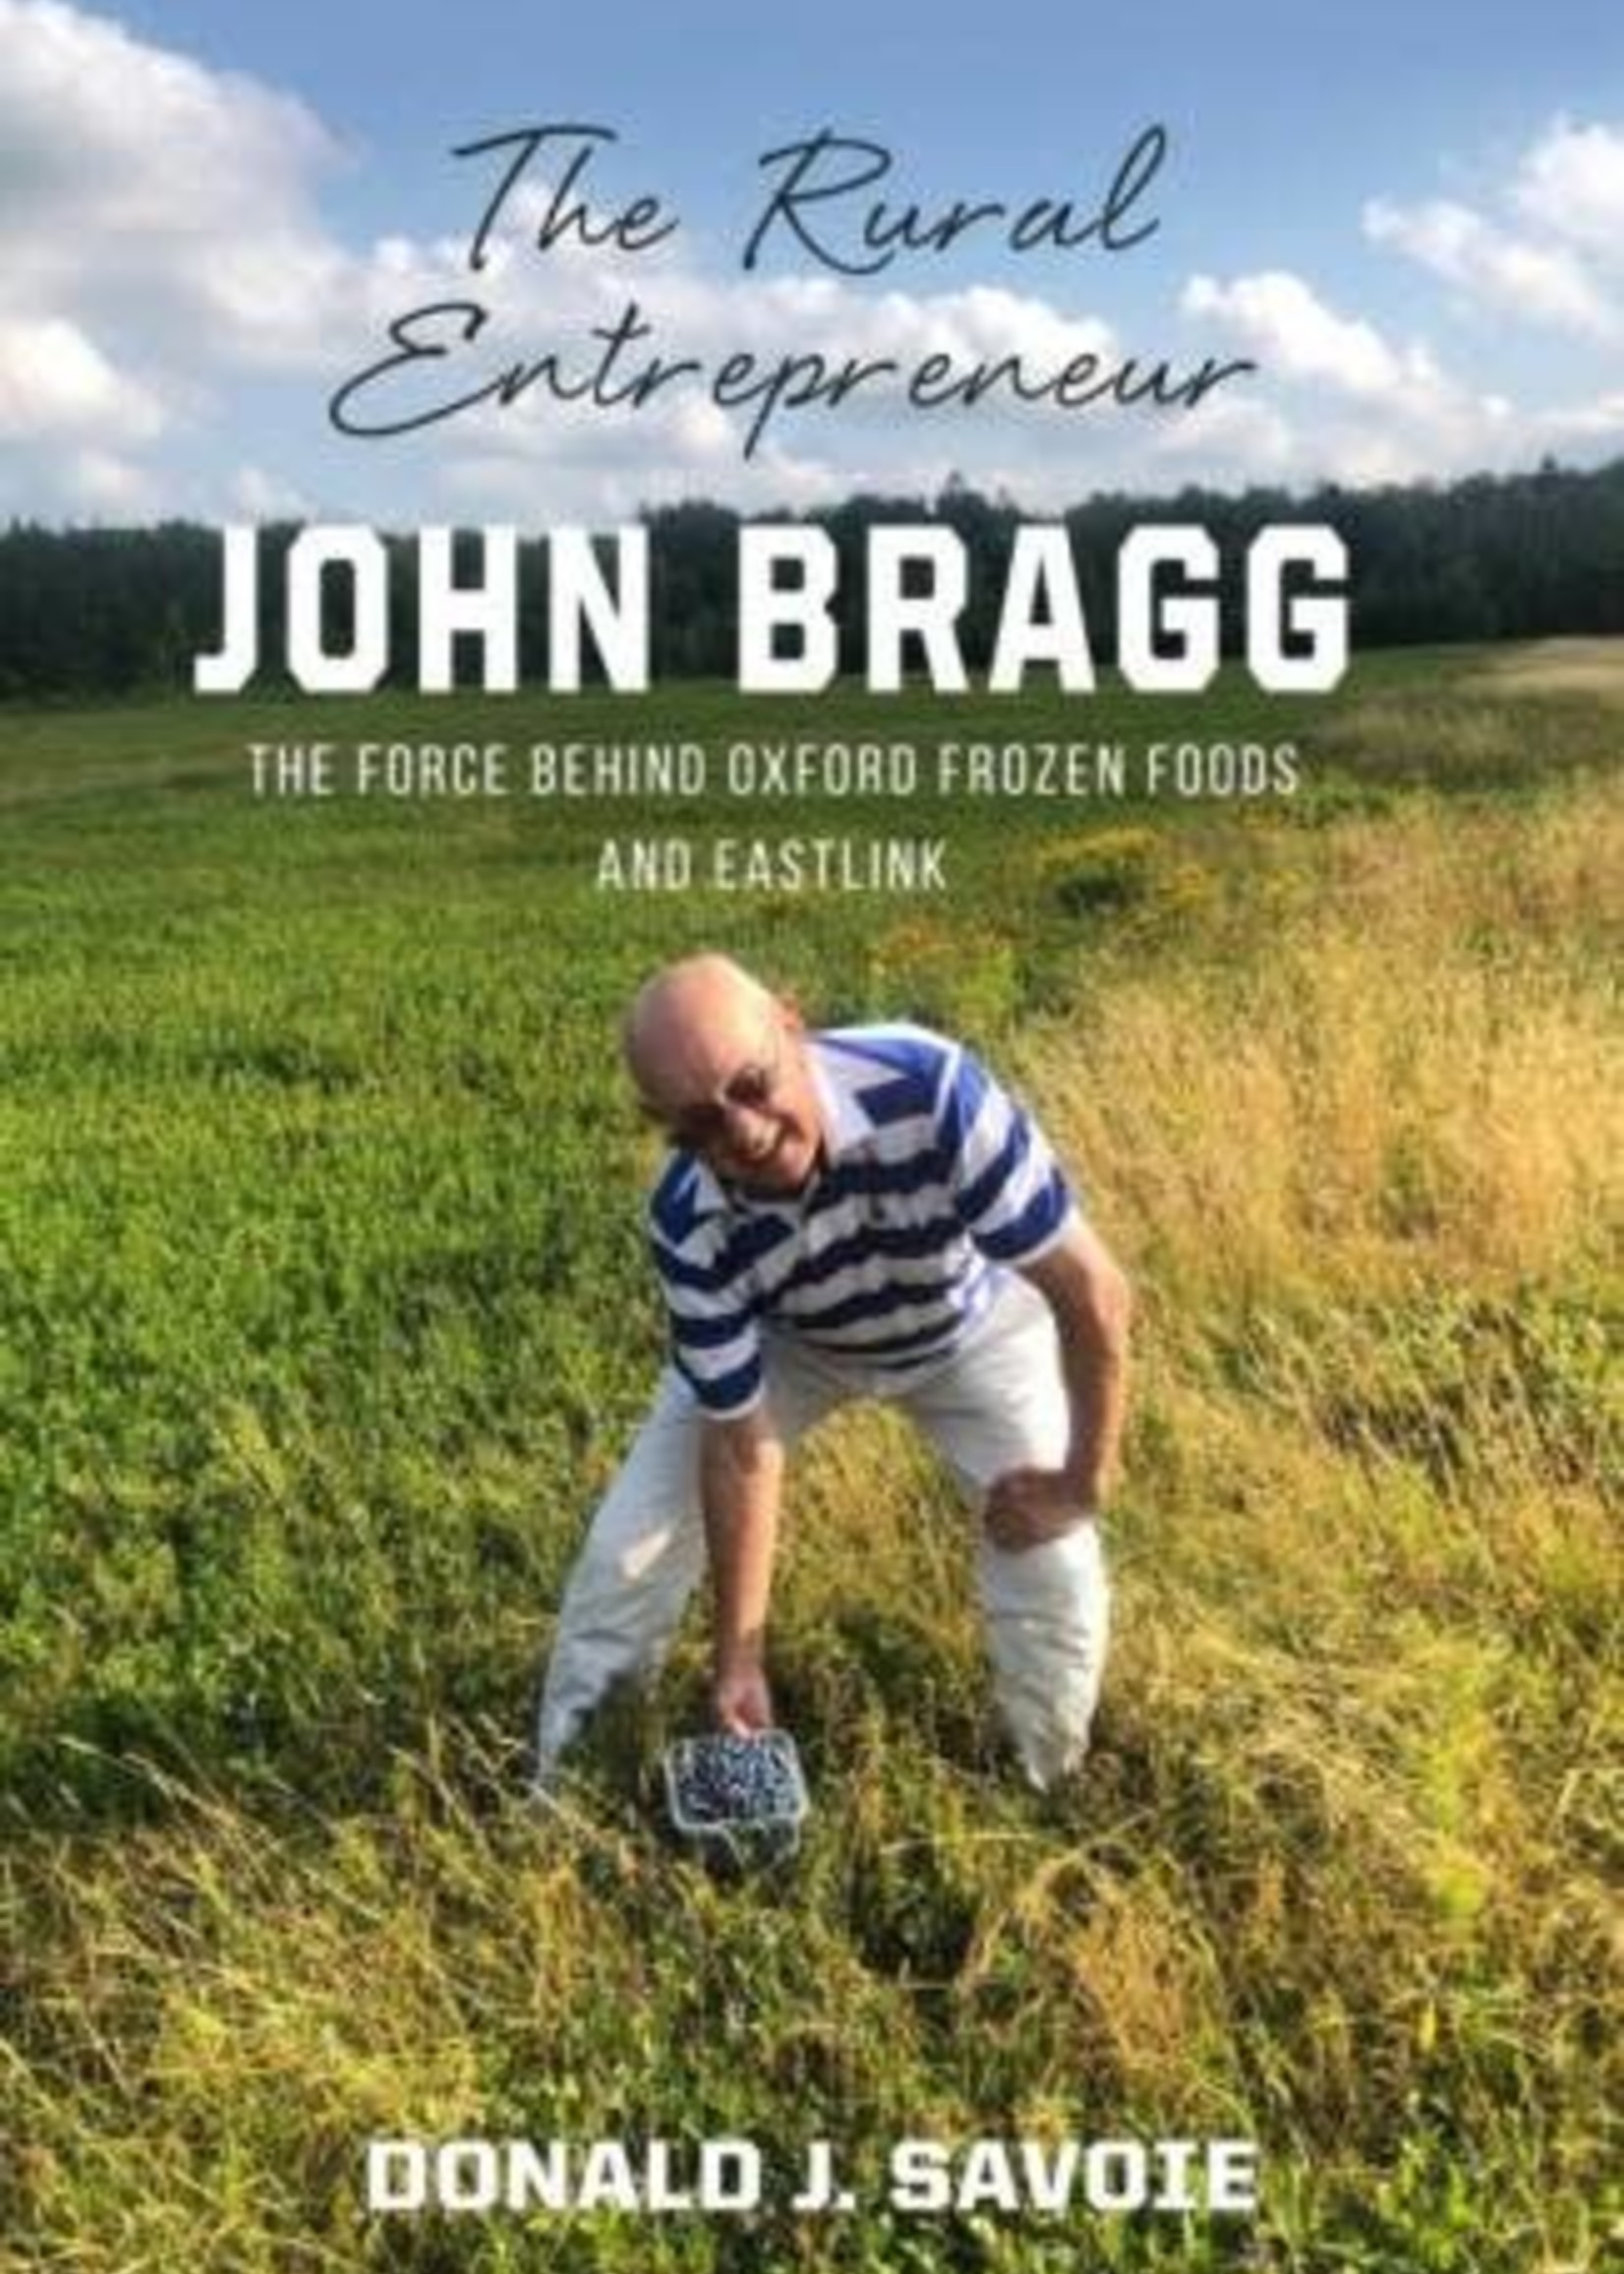 The Rural Entrepreneur: John Bragg The Force Behind Oxford Frozen Foods and Eastlink by Donald J. Savoie